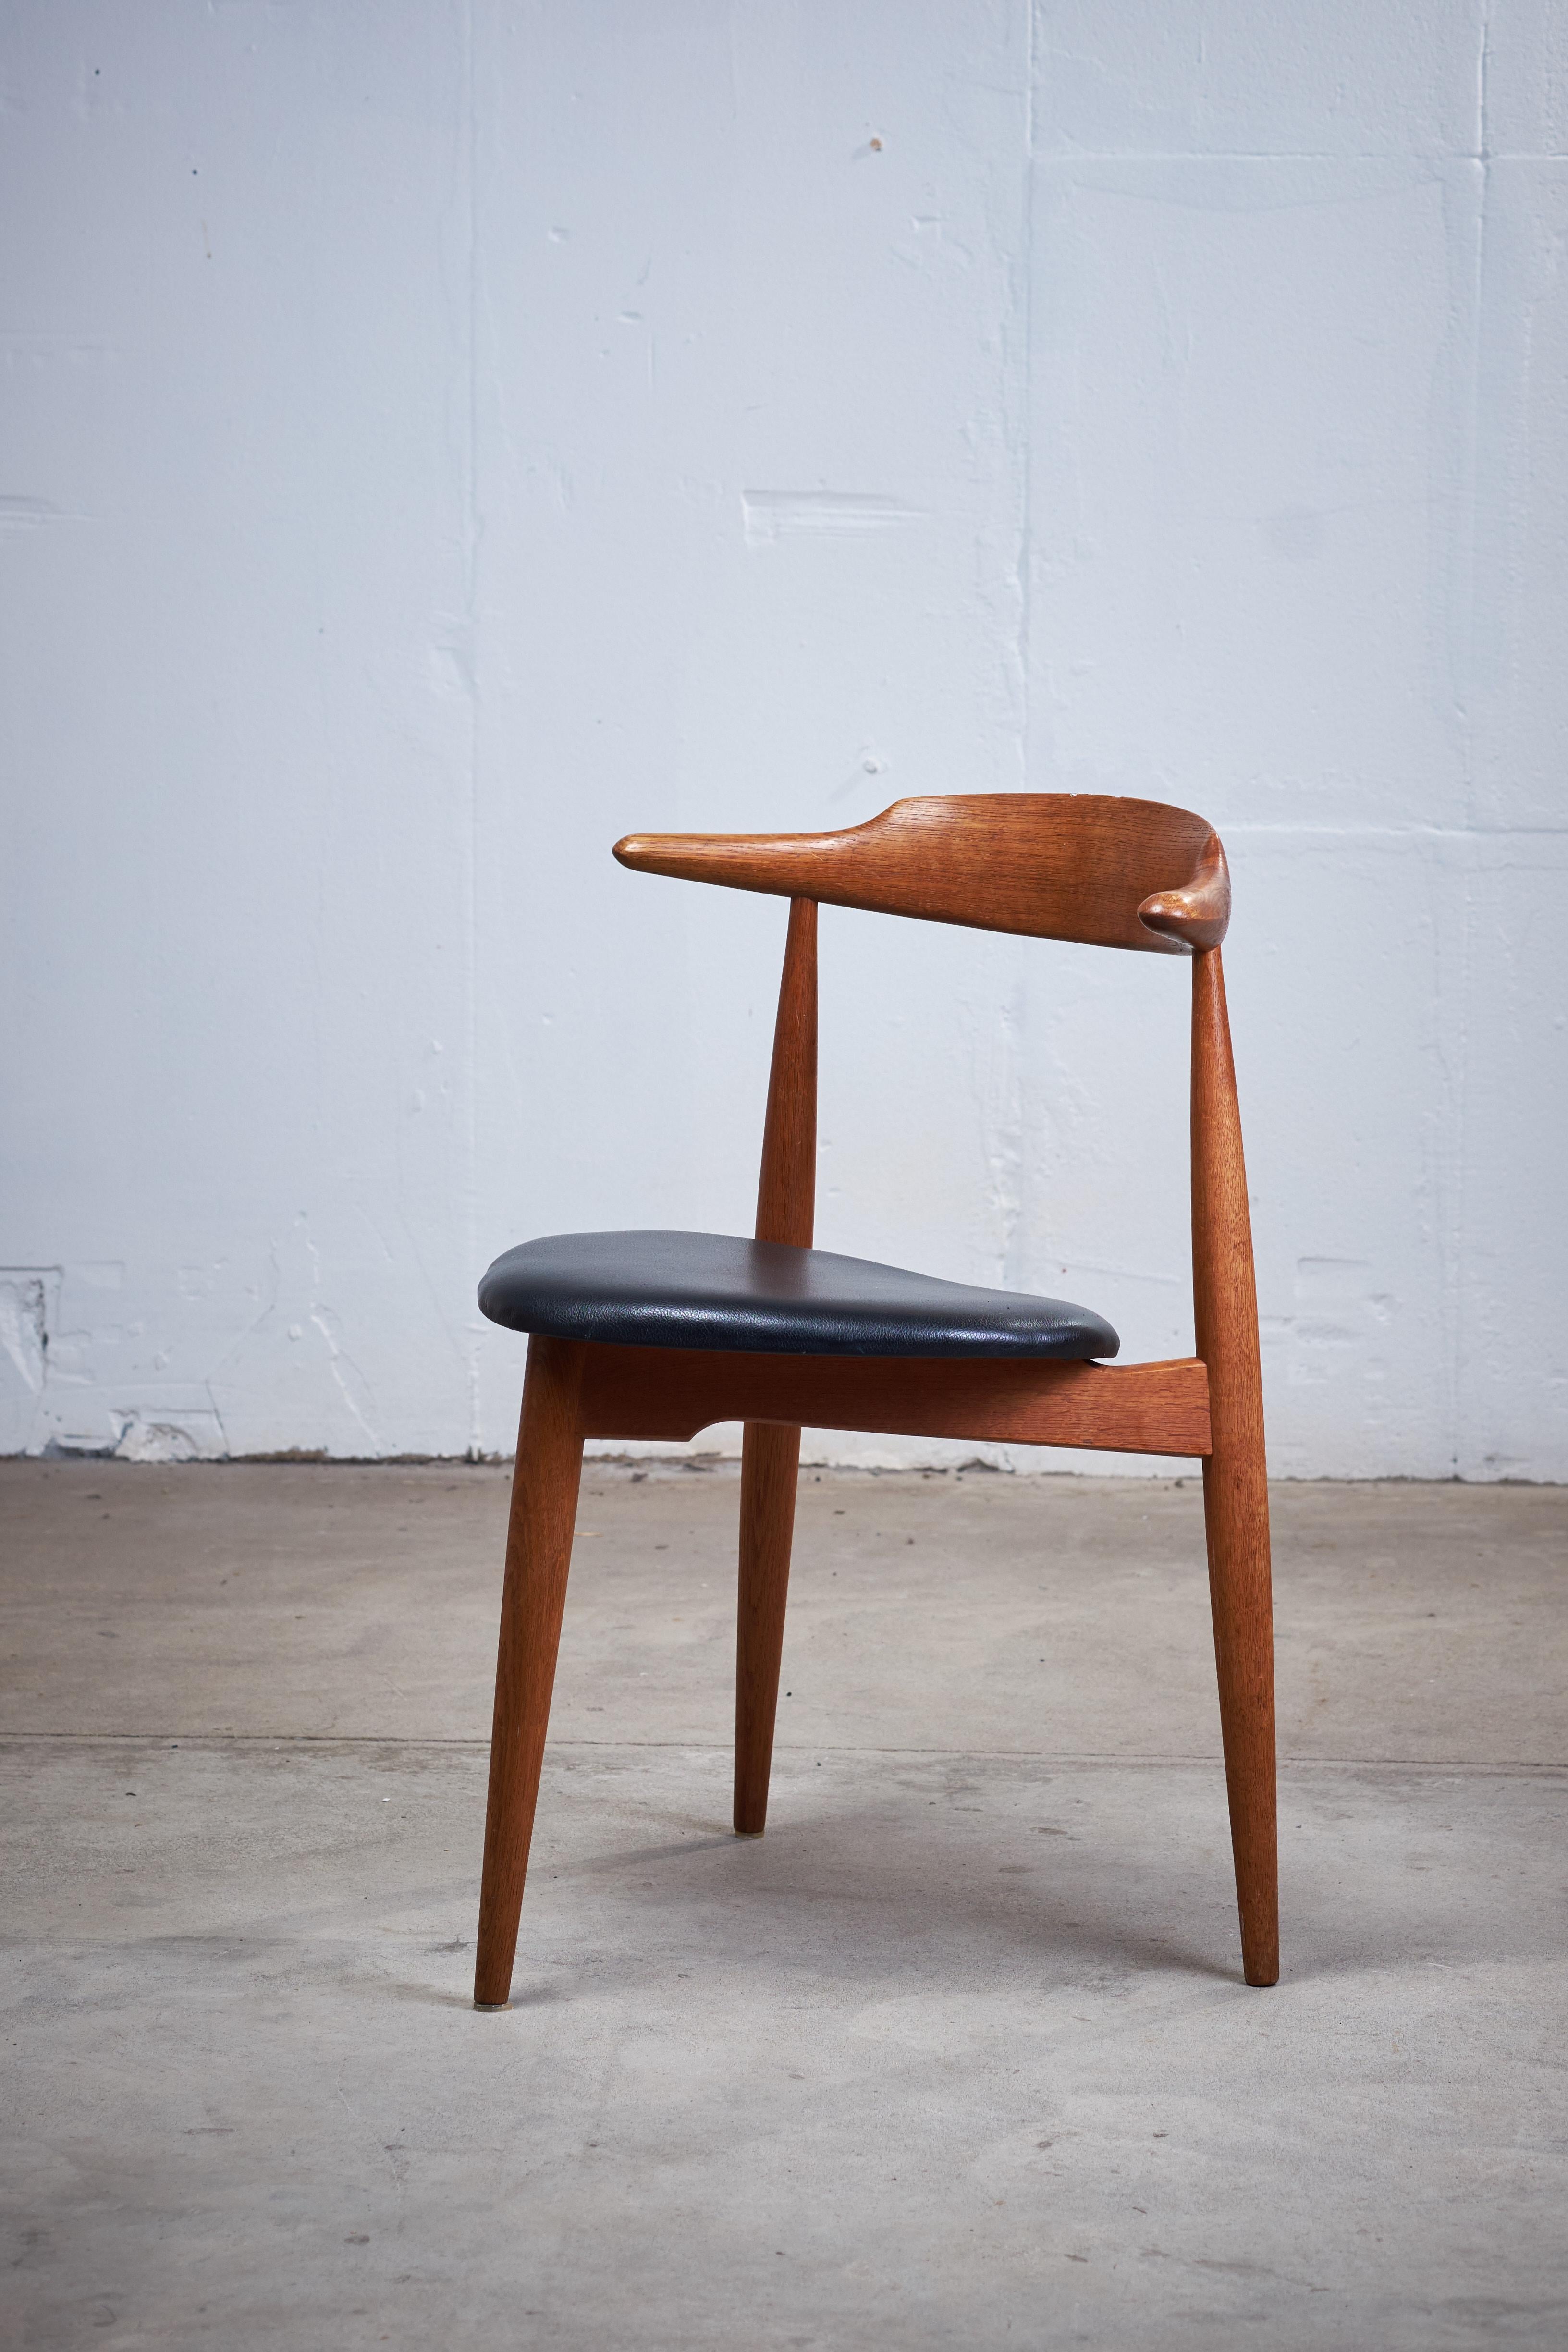 Stunning 'Heart chair' in oak by one of our biggest Danish designers, Hans J. Wegner, designed for Fritz Hansen.
This is sure one of the midcentury classics and a chair you can fit in every room, it is not at all hard to find space for this beauty.